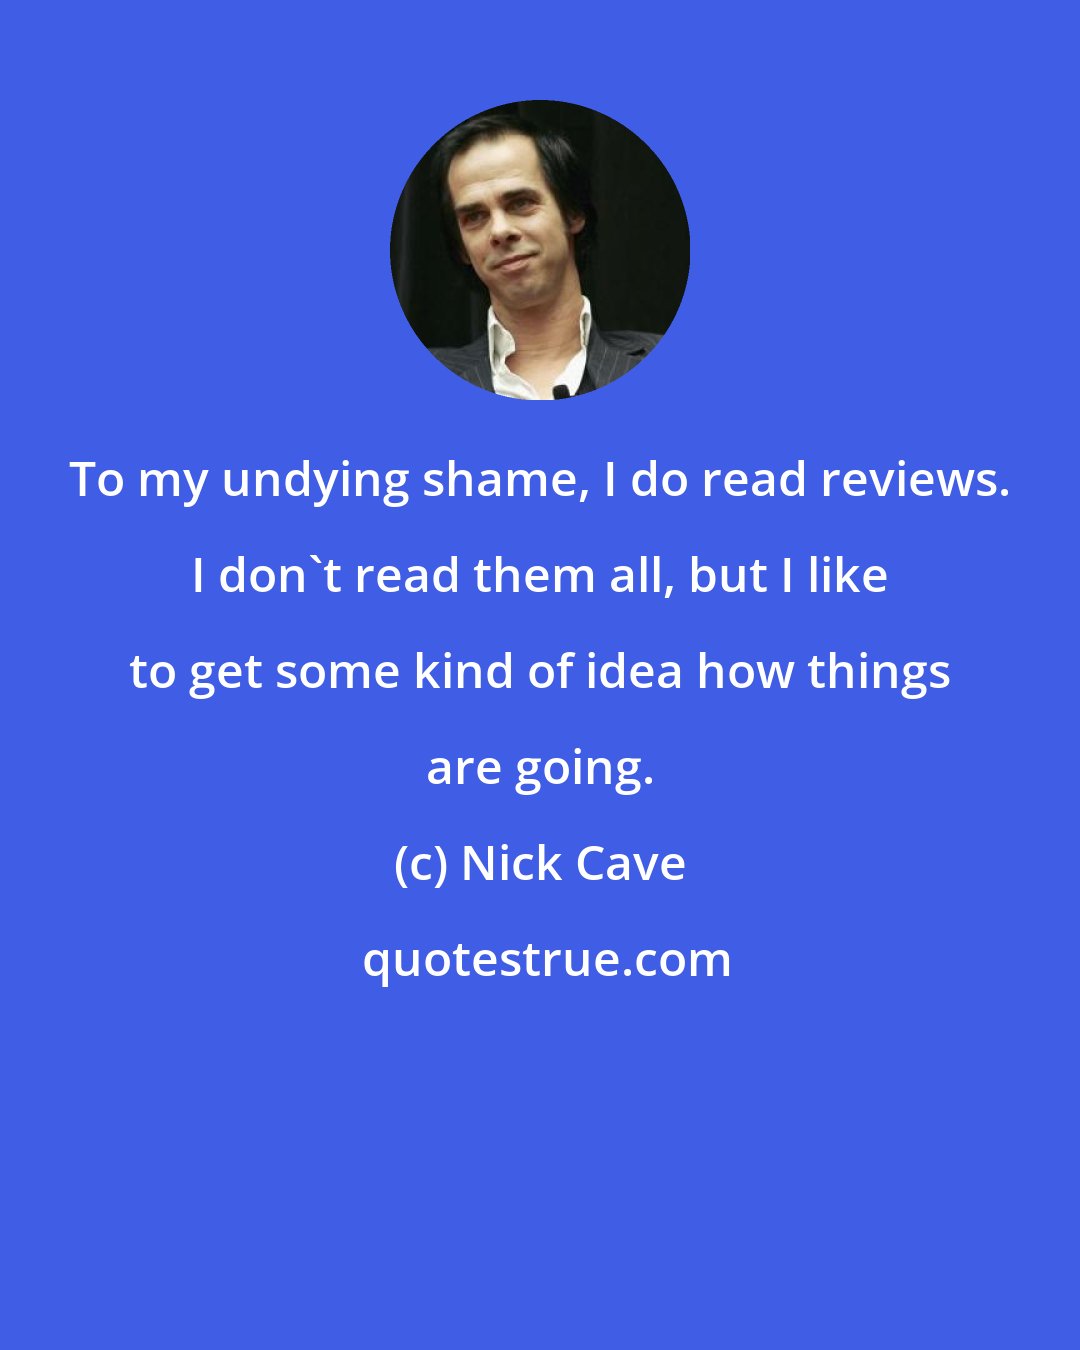 Nick Cave: To my undying shame, I do read reviews. I don't read them all, but I like to get some kind of idea how things are going.